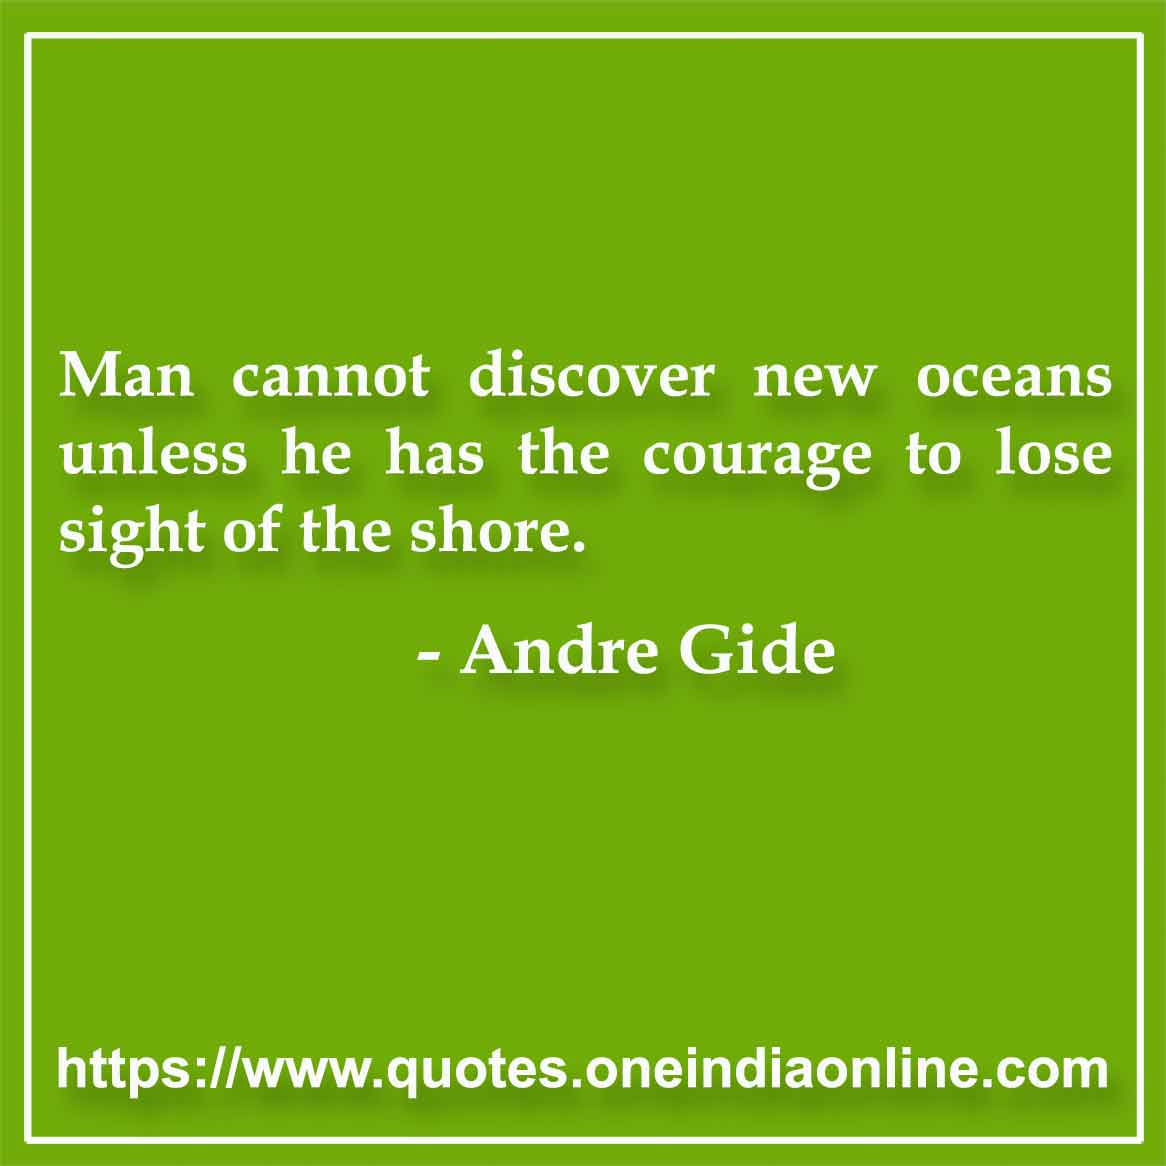 Man cannot discover new oceans unless he has the courage to lose sight of the shore.

- Andre Gide